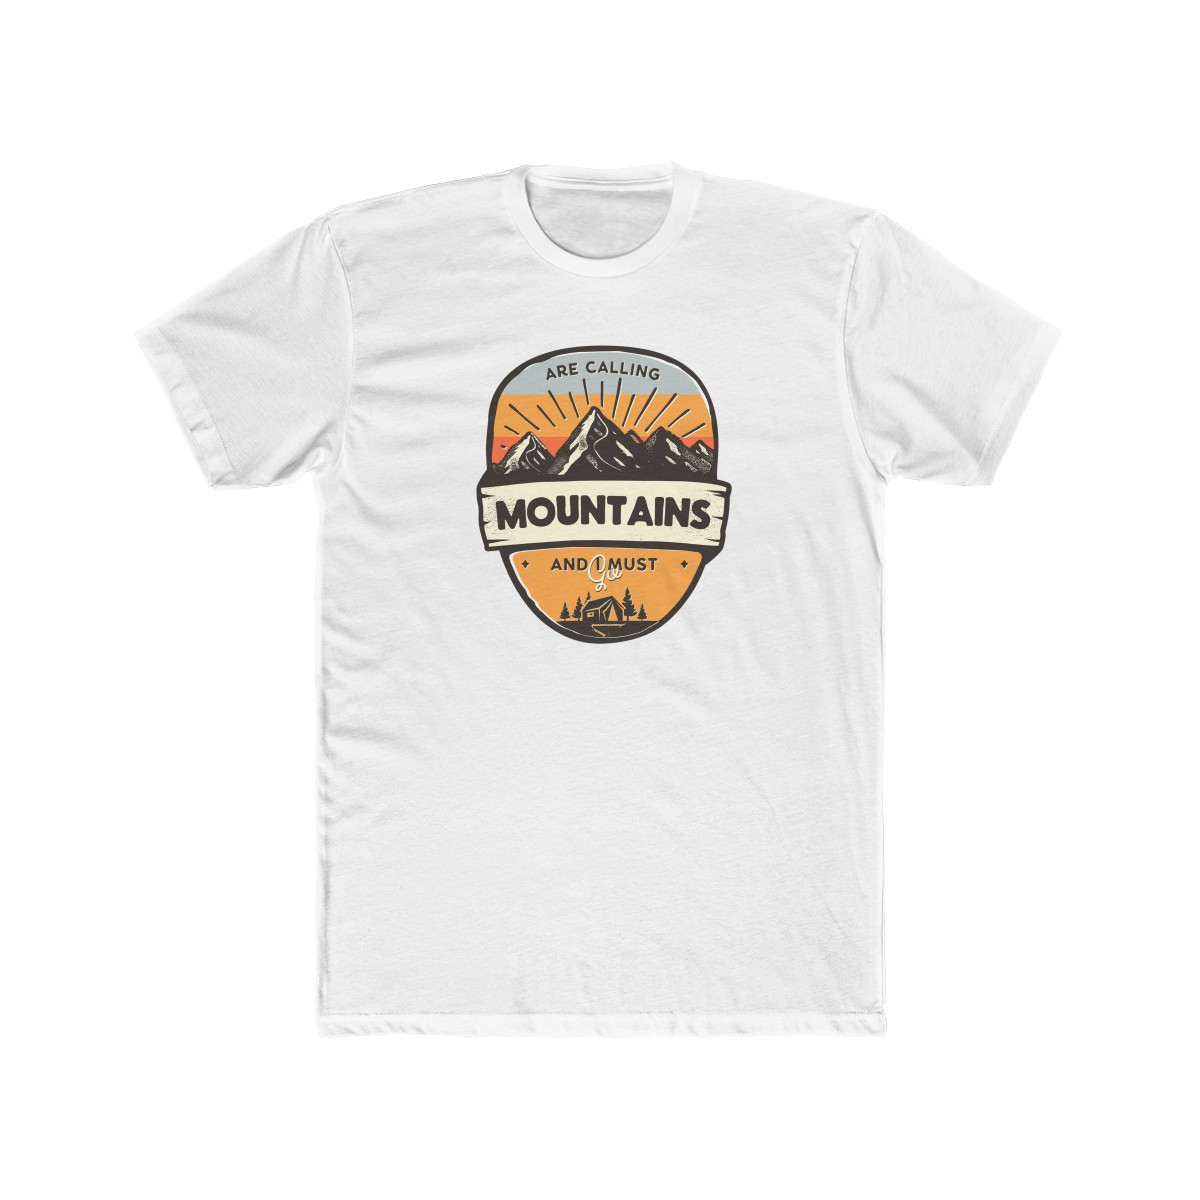 Featured image for “Mountains Are Calling - Premium Fit Cotton Crew Tee”